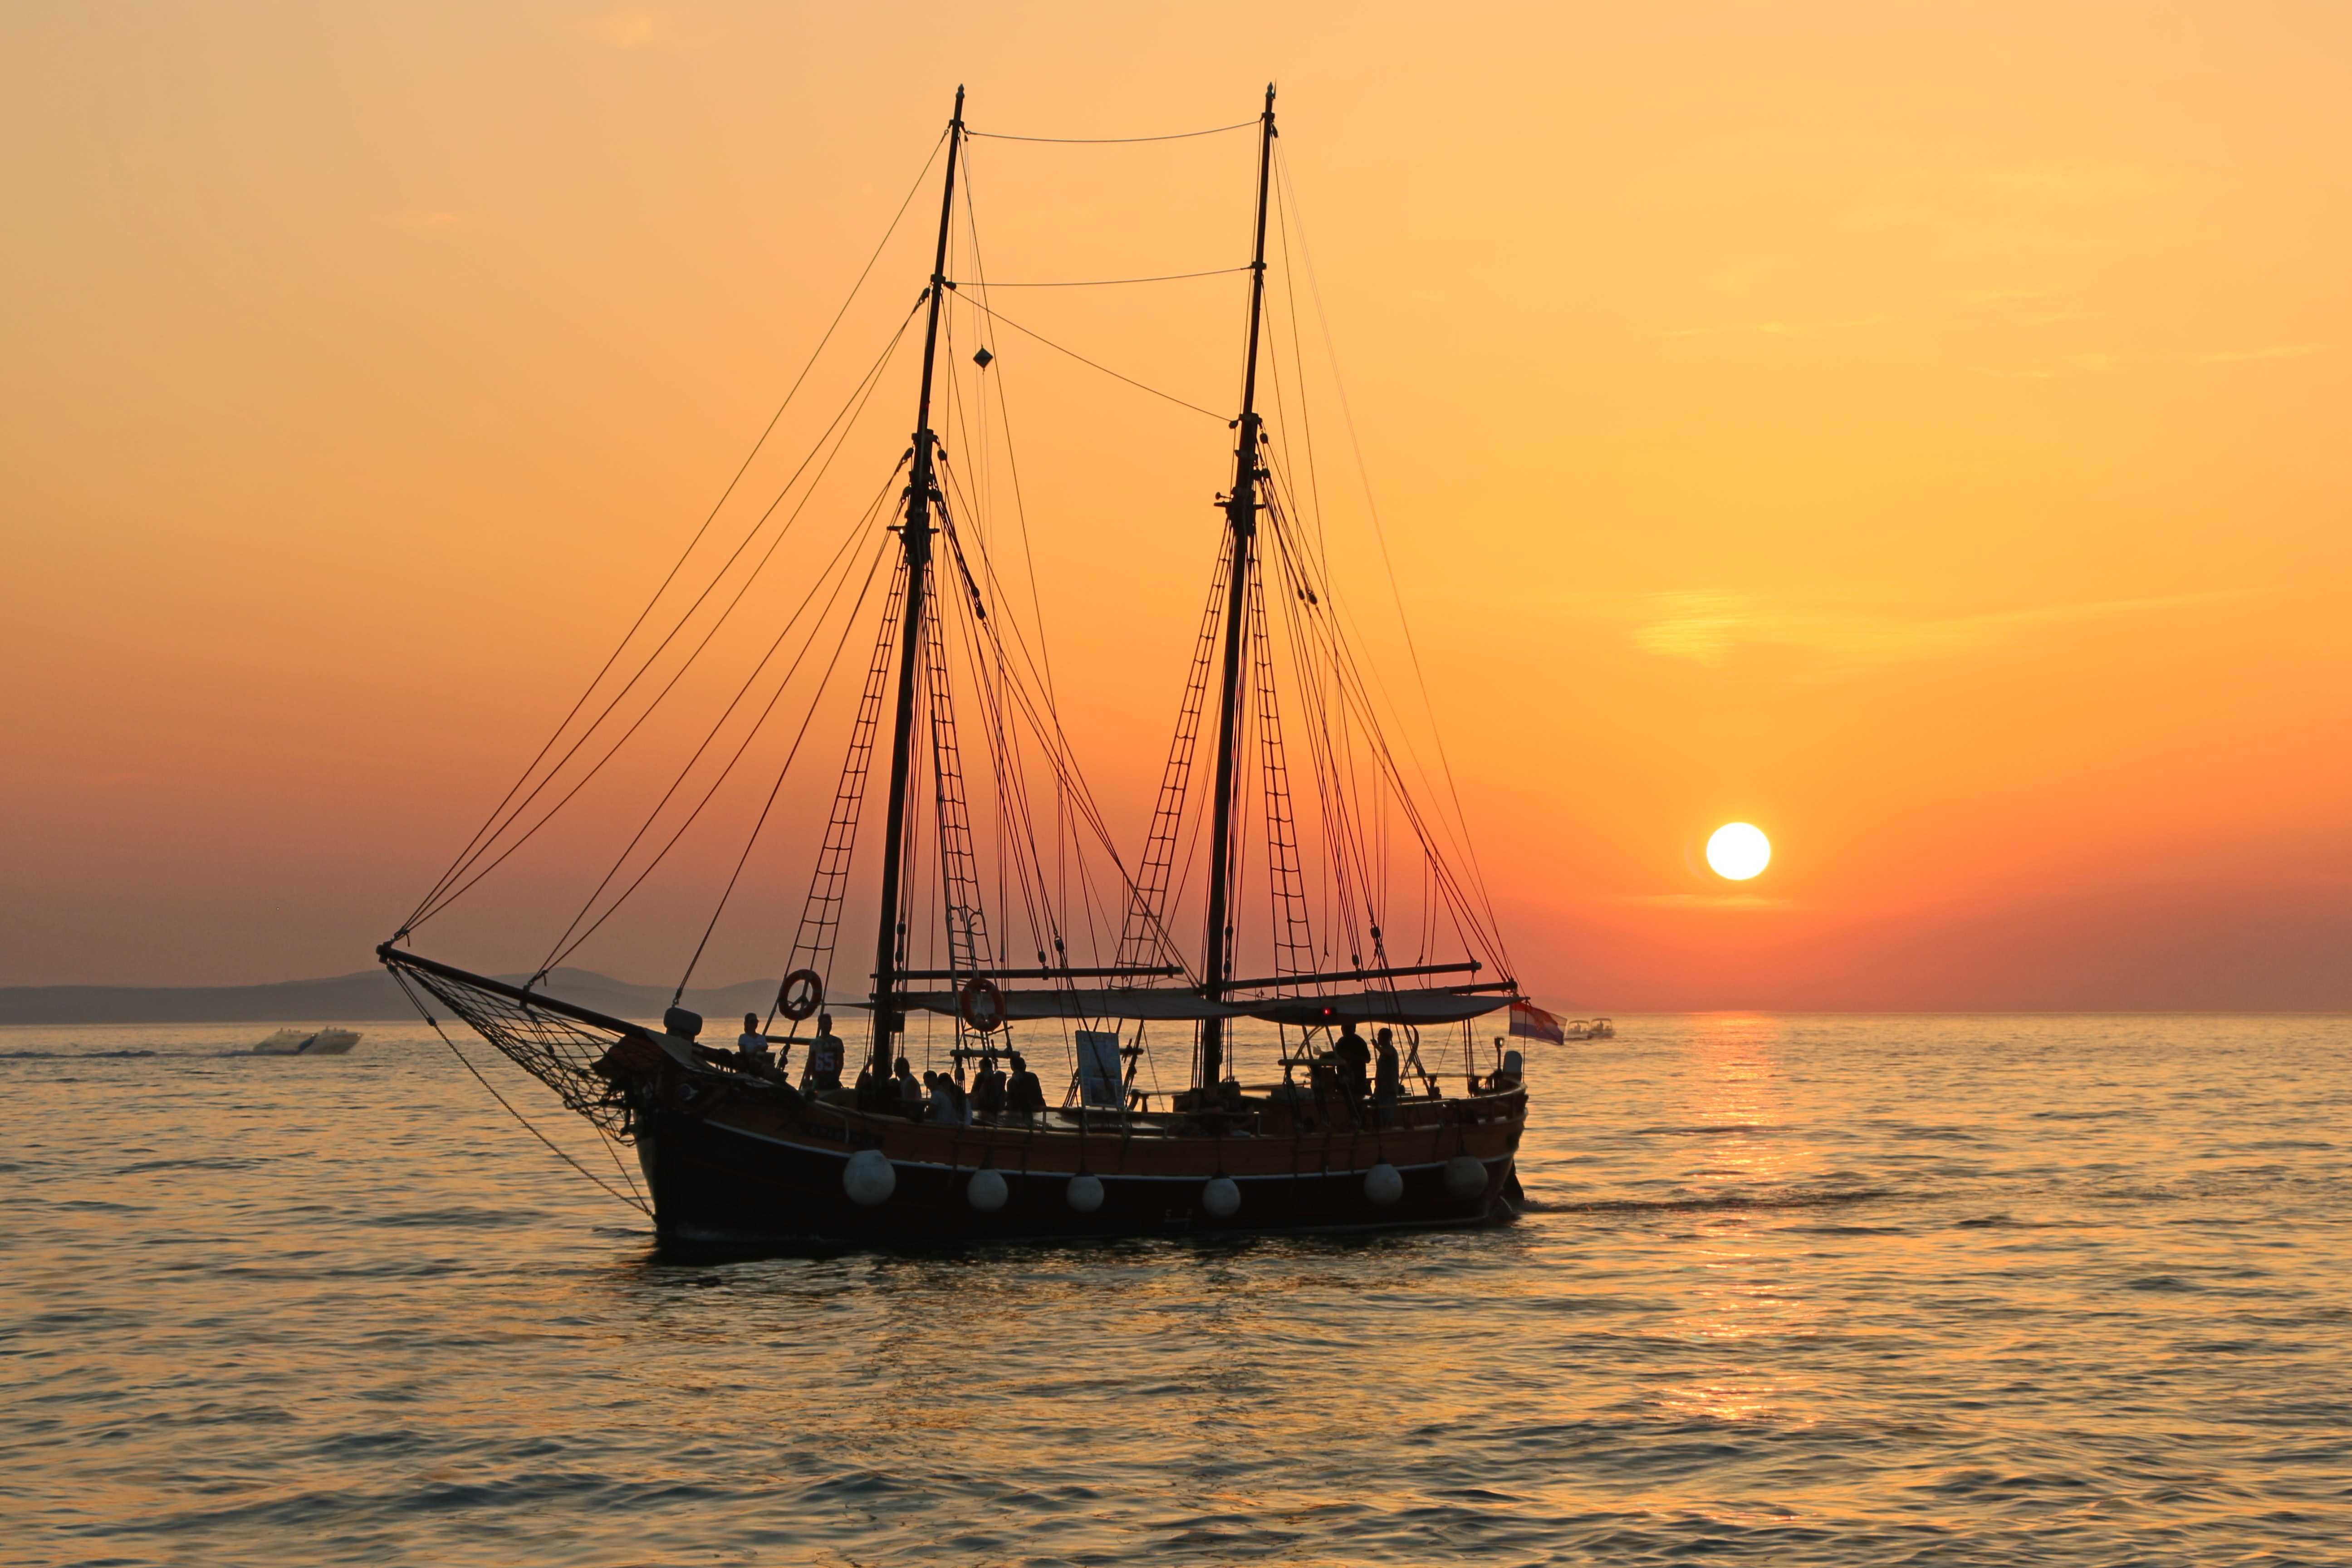 A scene of an antique ship sailing across the water, a bright orange sunset on the horizon in the background.